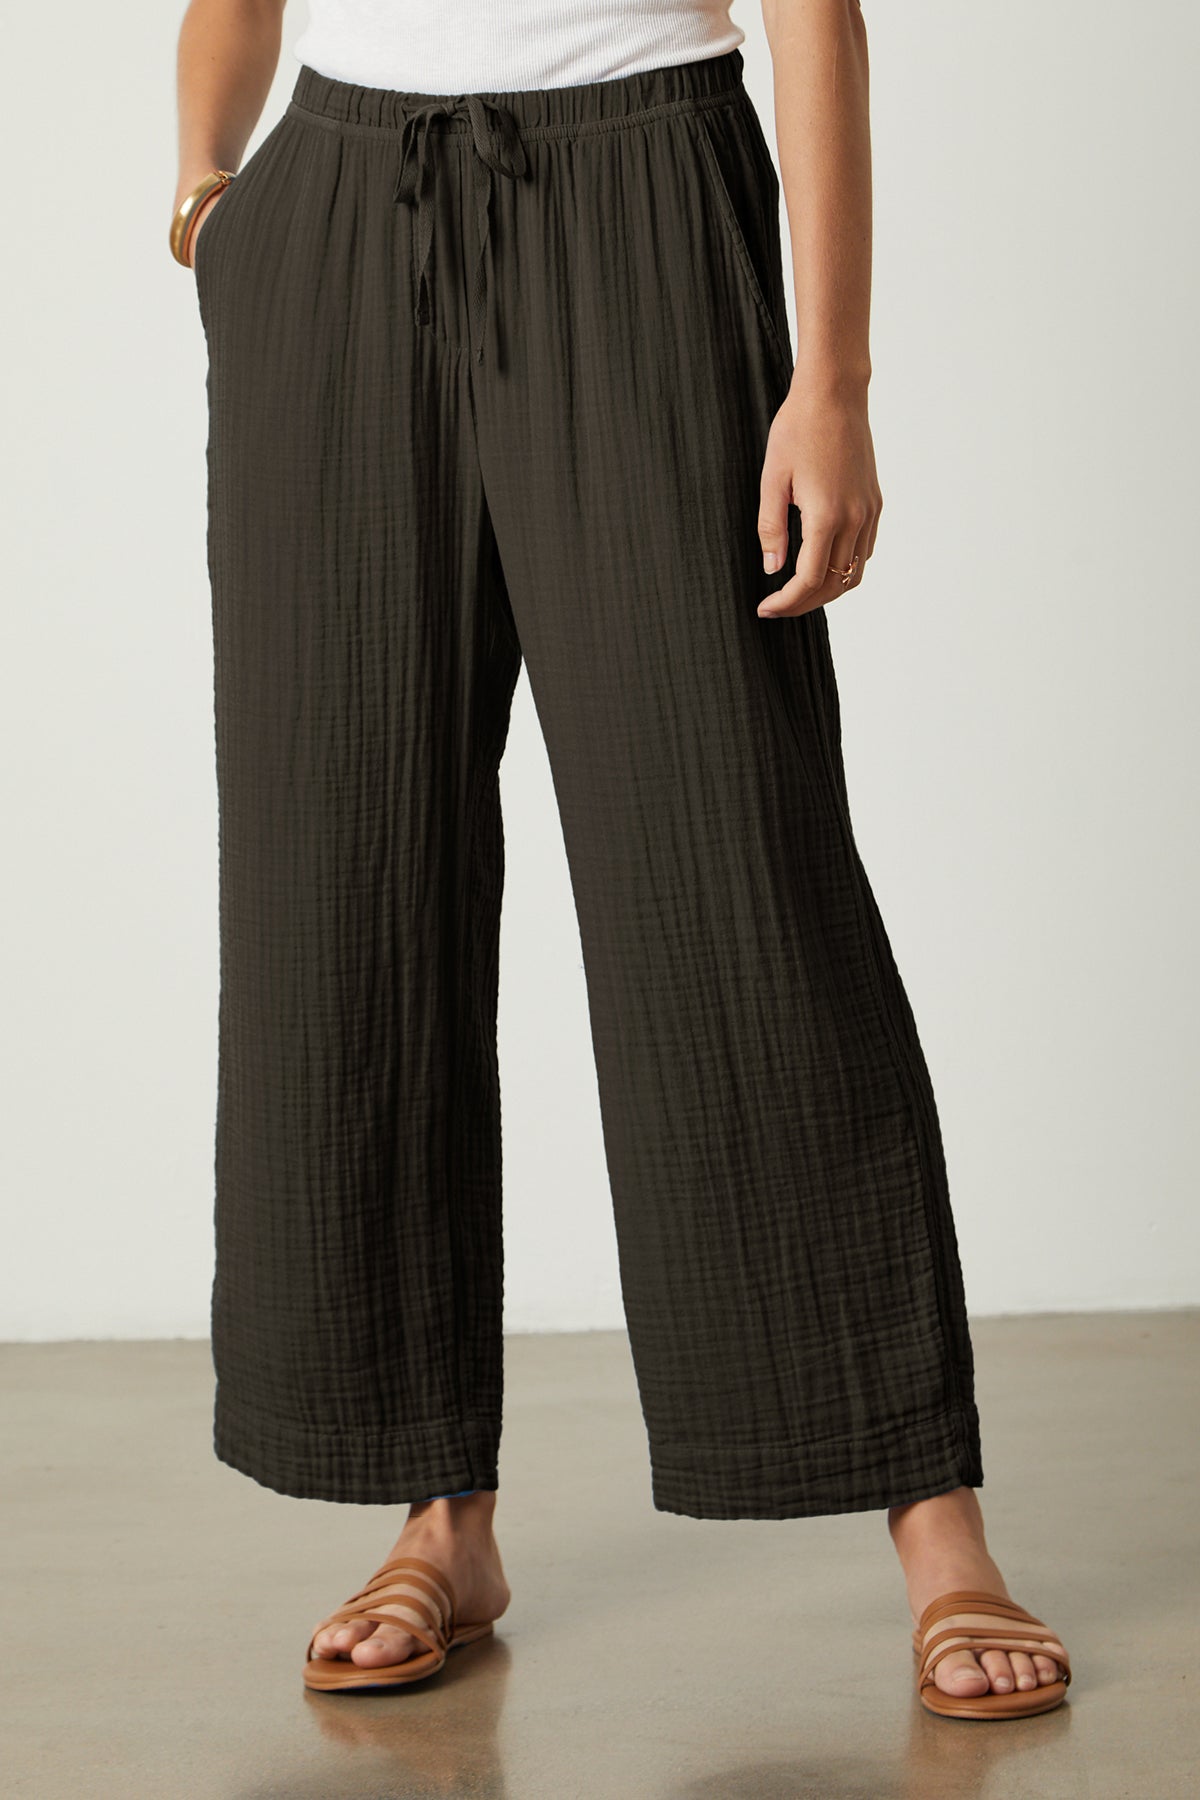 A woman wearing dark brown hedge color Velvet by Graham & Spencer FRANNY COTTON GAUZE PANT front-26143109152961